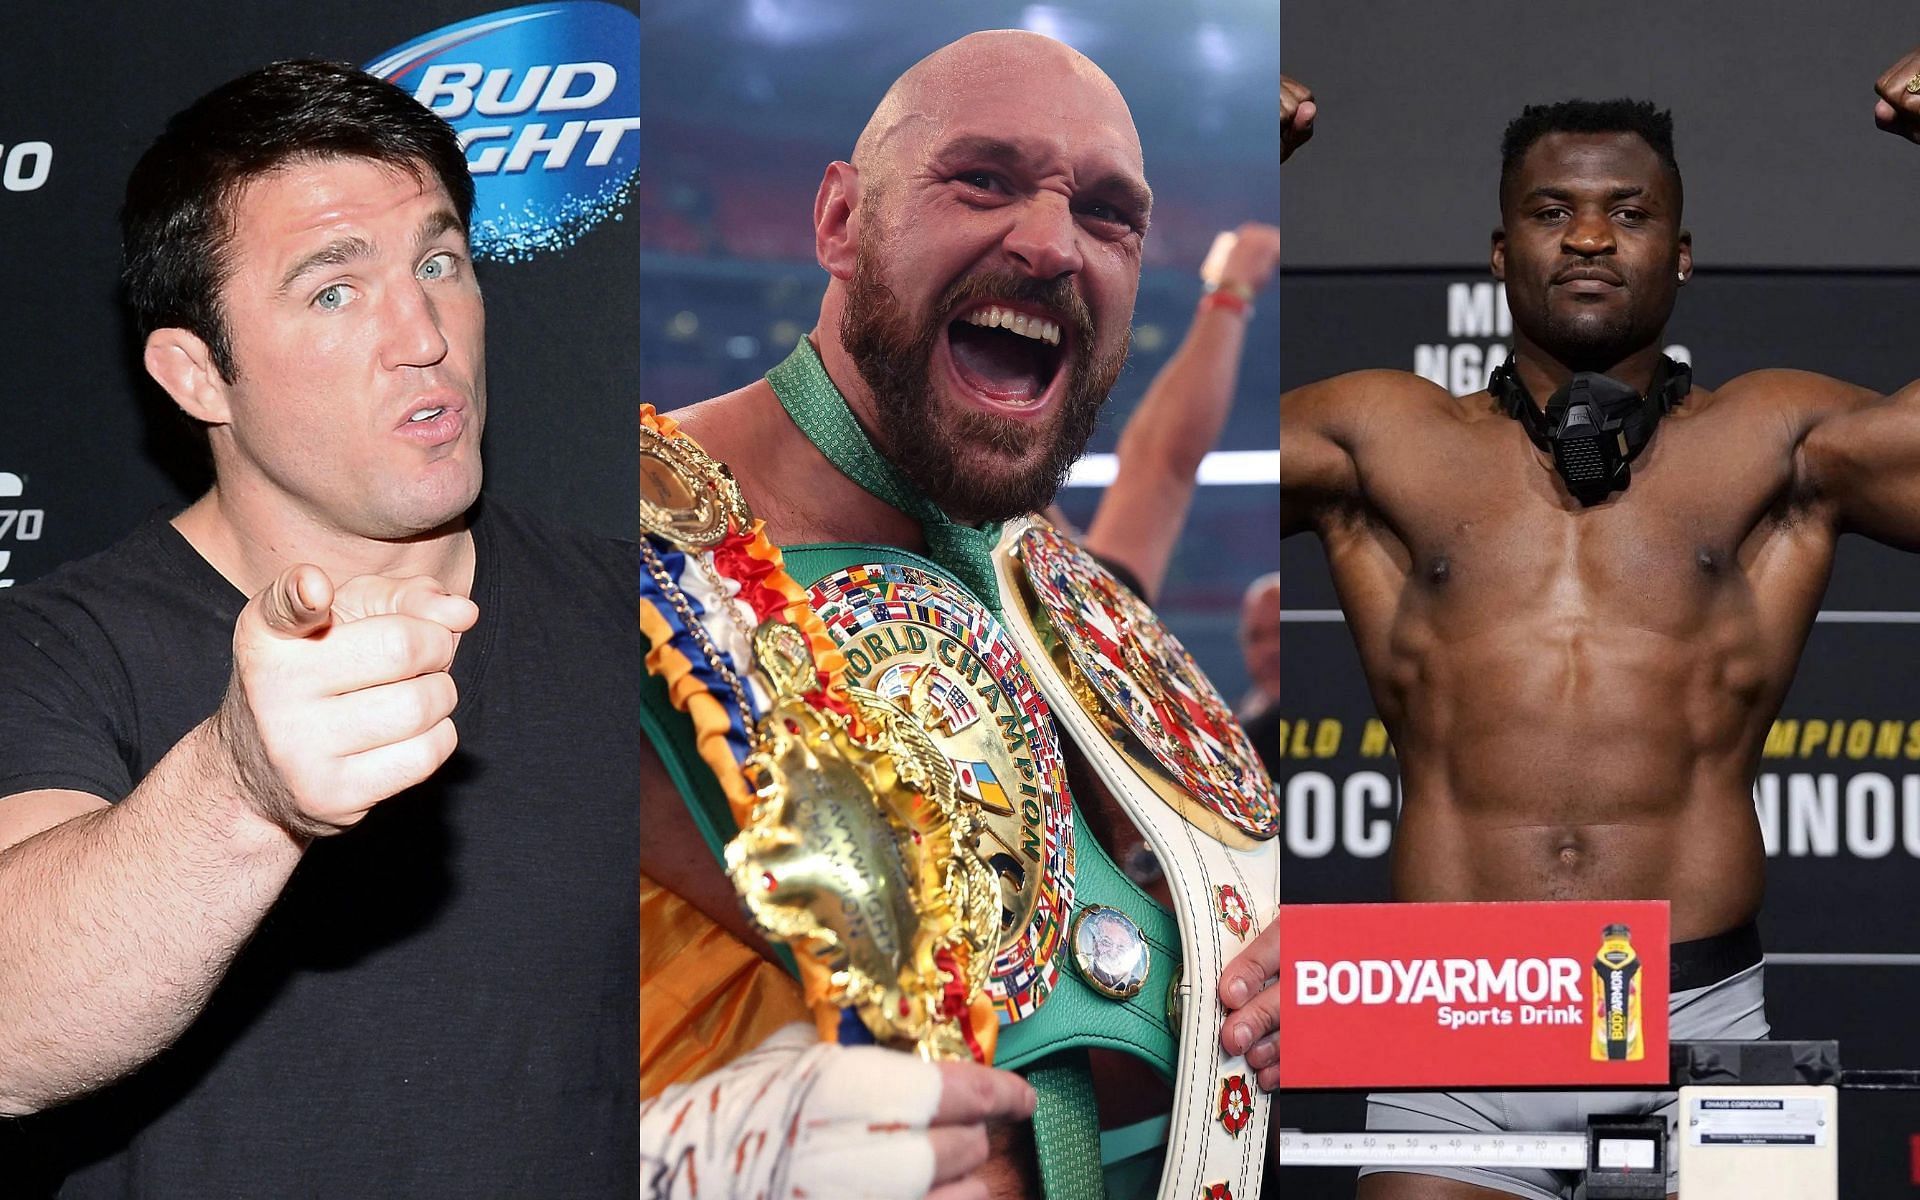 Chael Sonnen (left), Tyson Fury (center), and Francis Ngannou (right) [Images courtesy of Getty]